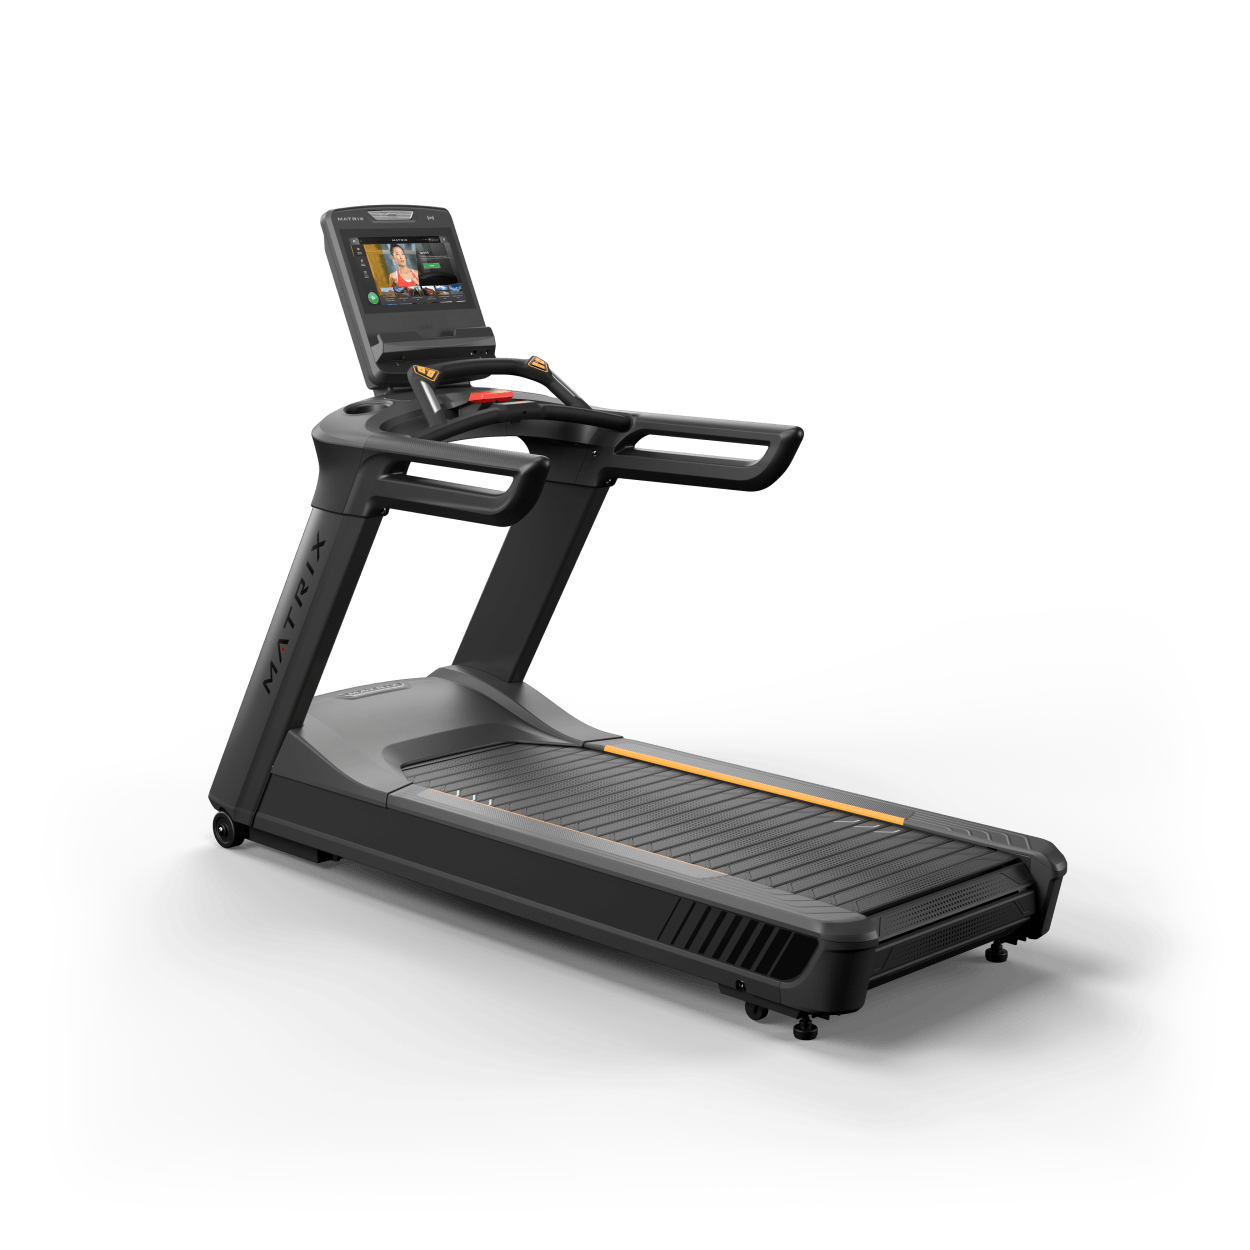 Matrix Performance Plus Treadmill with Touch Console full view | Fitness Experience